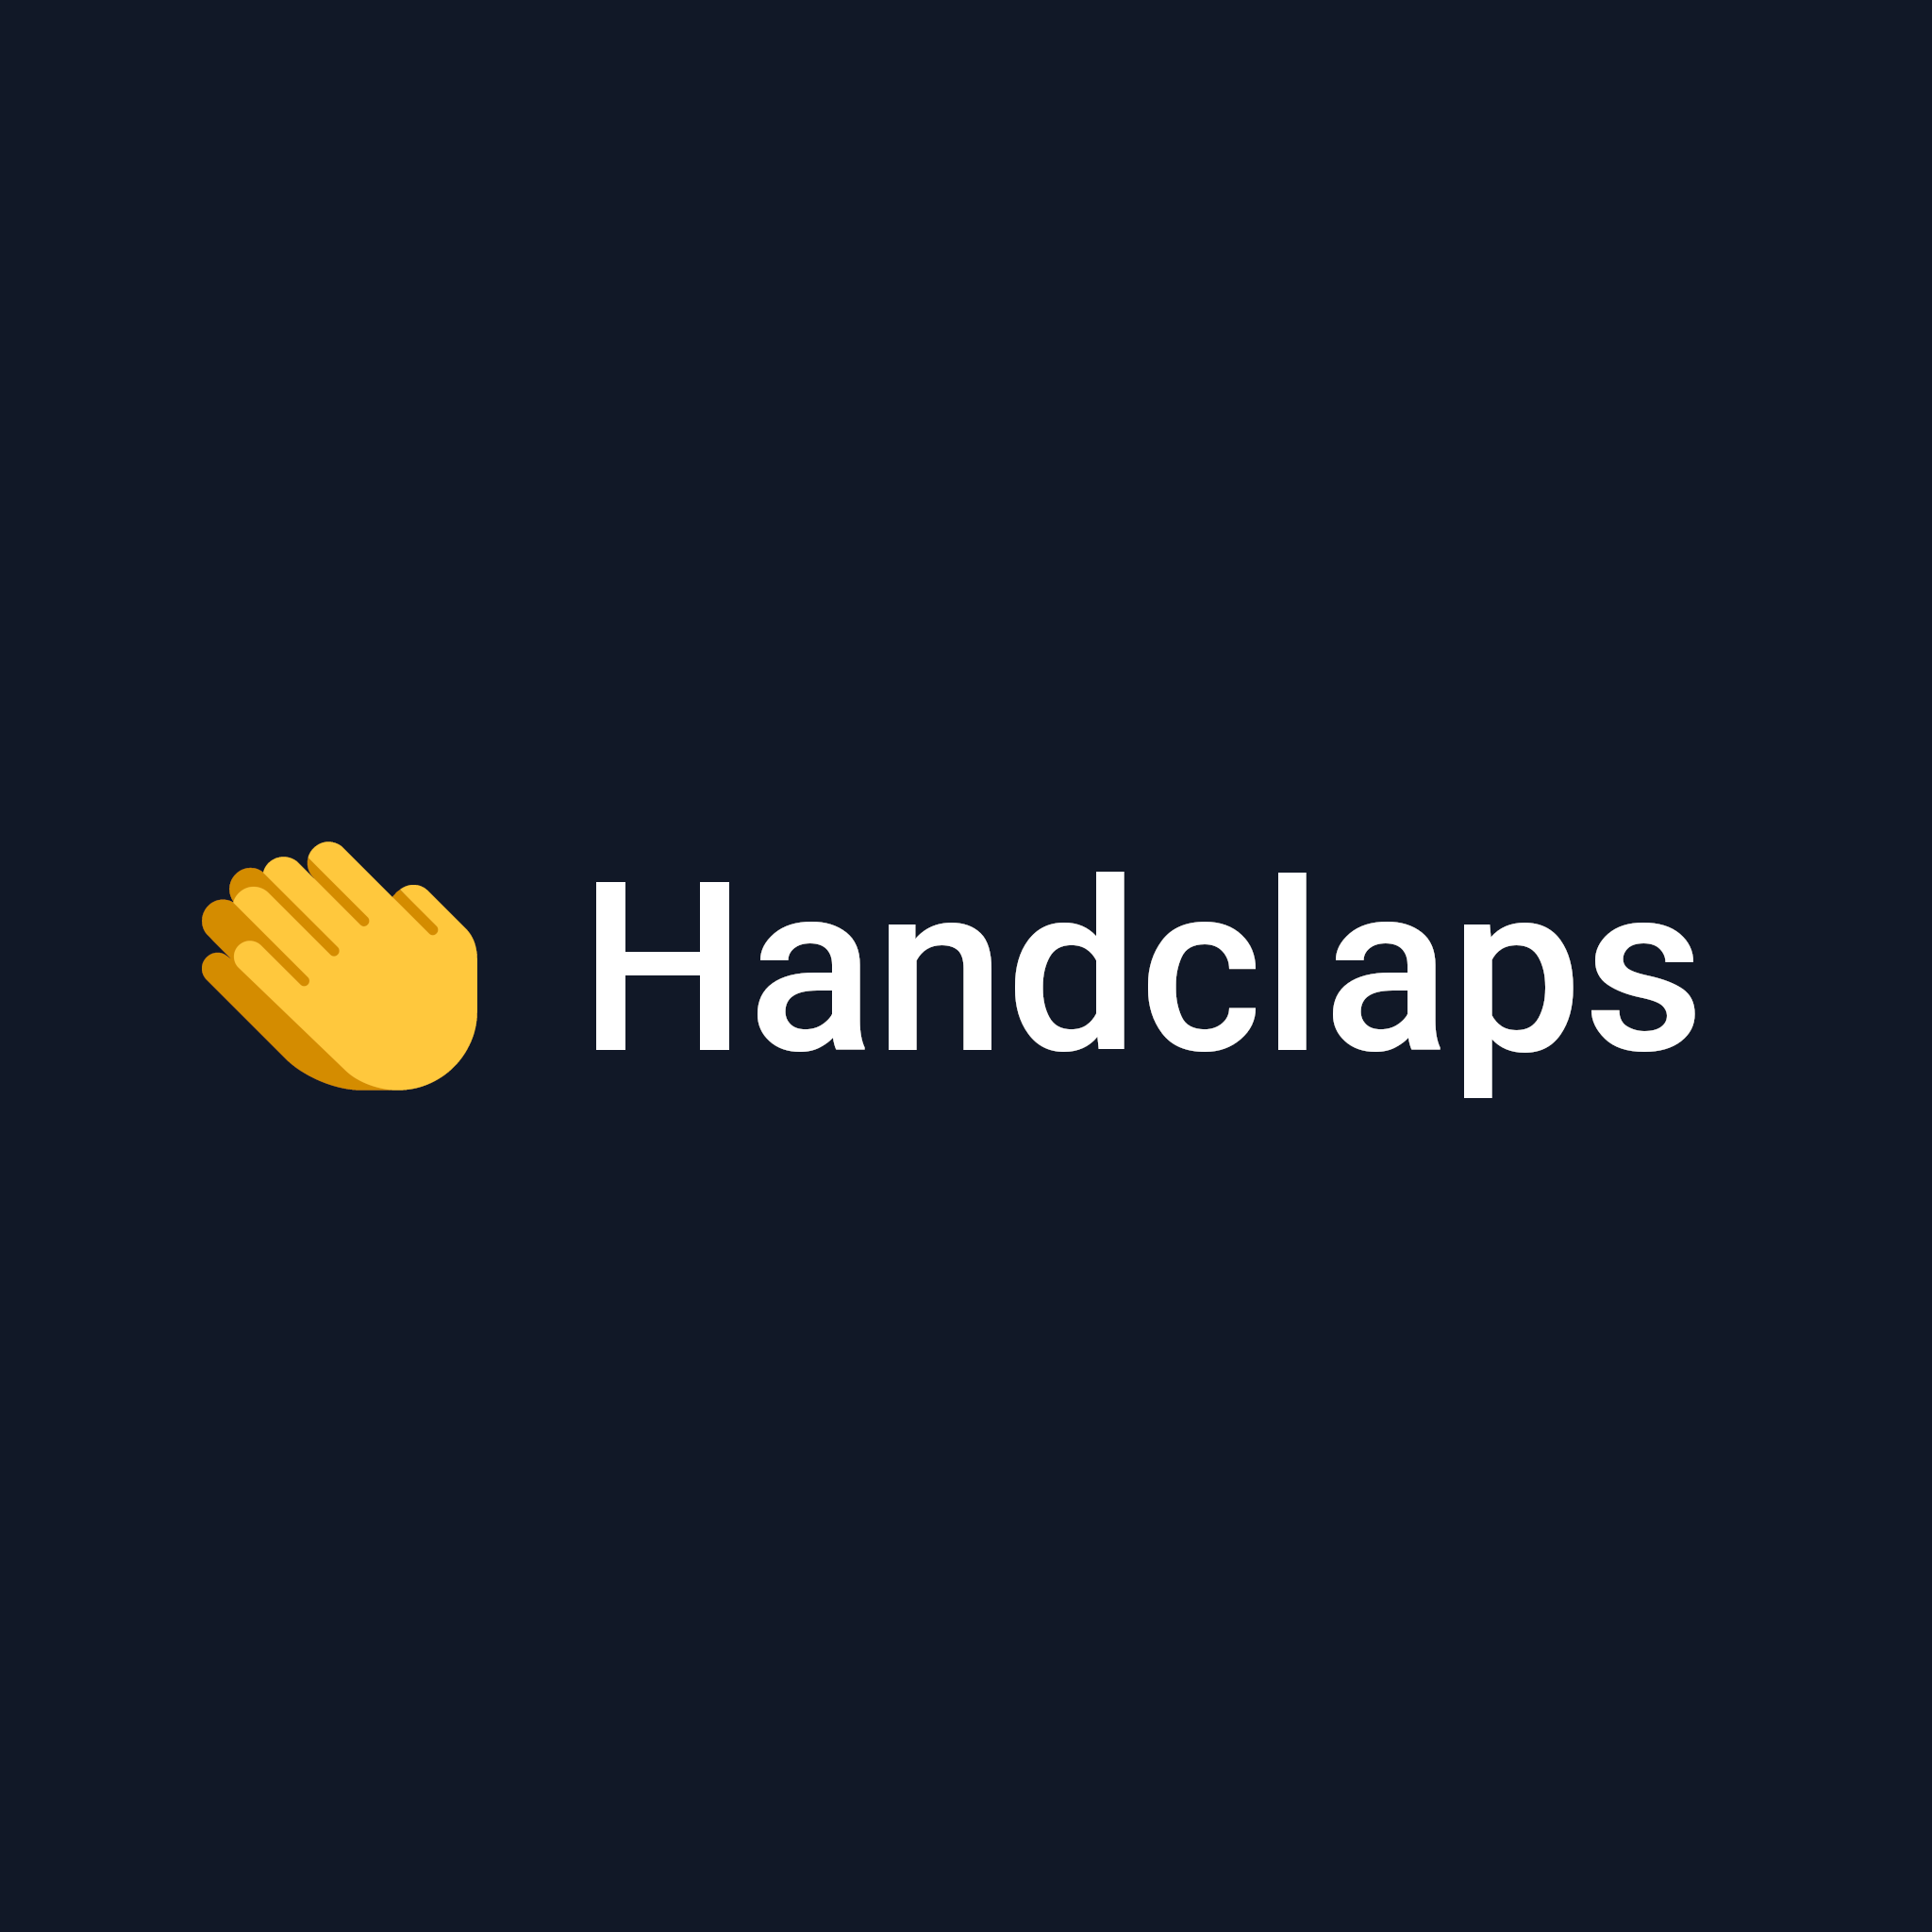 Handclaps Beat Video Maker - the easiest software to create hip hop beat videos